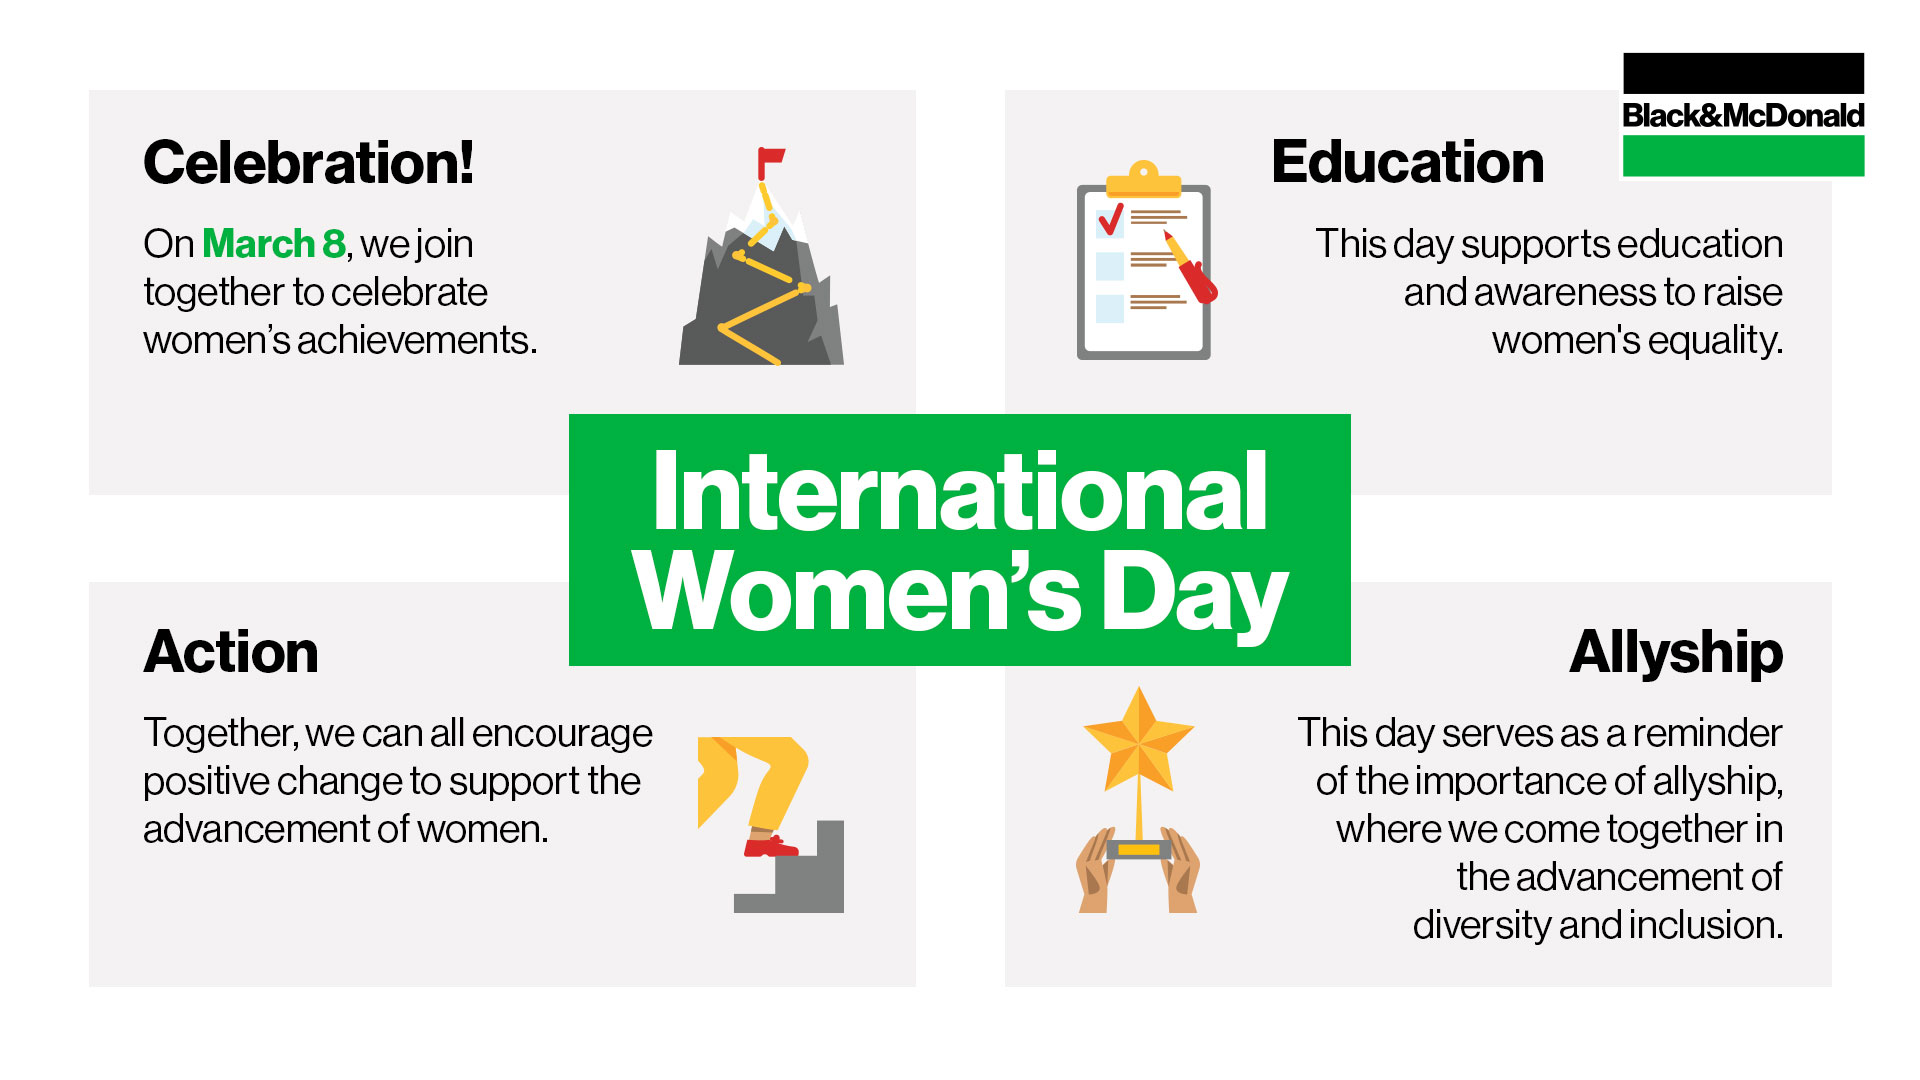 International Women's Day celebration, education, action, and allyship infographic image